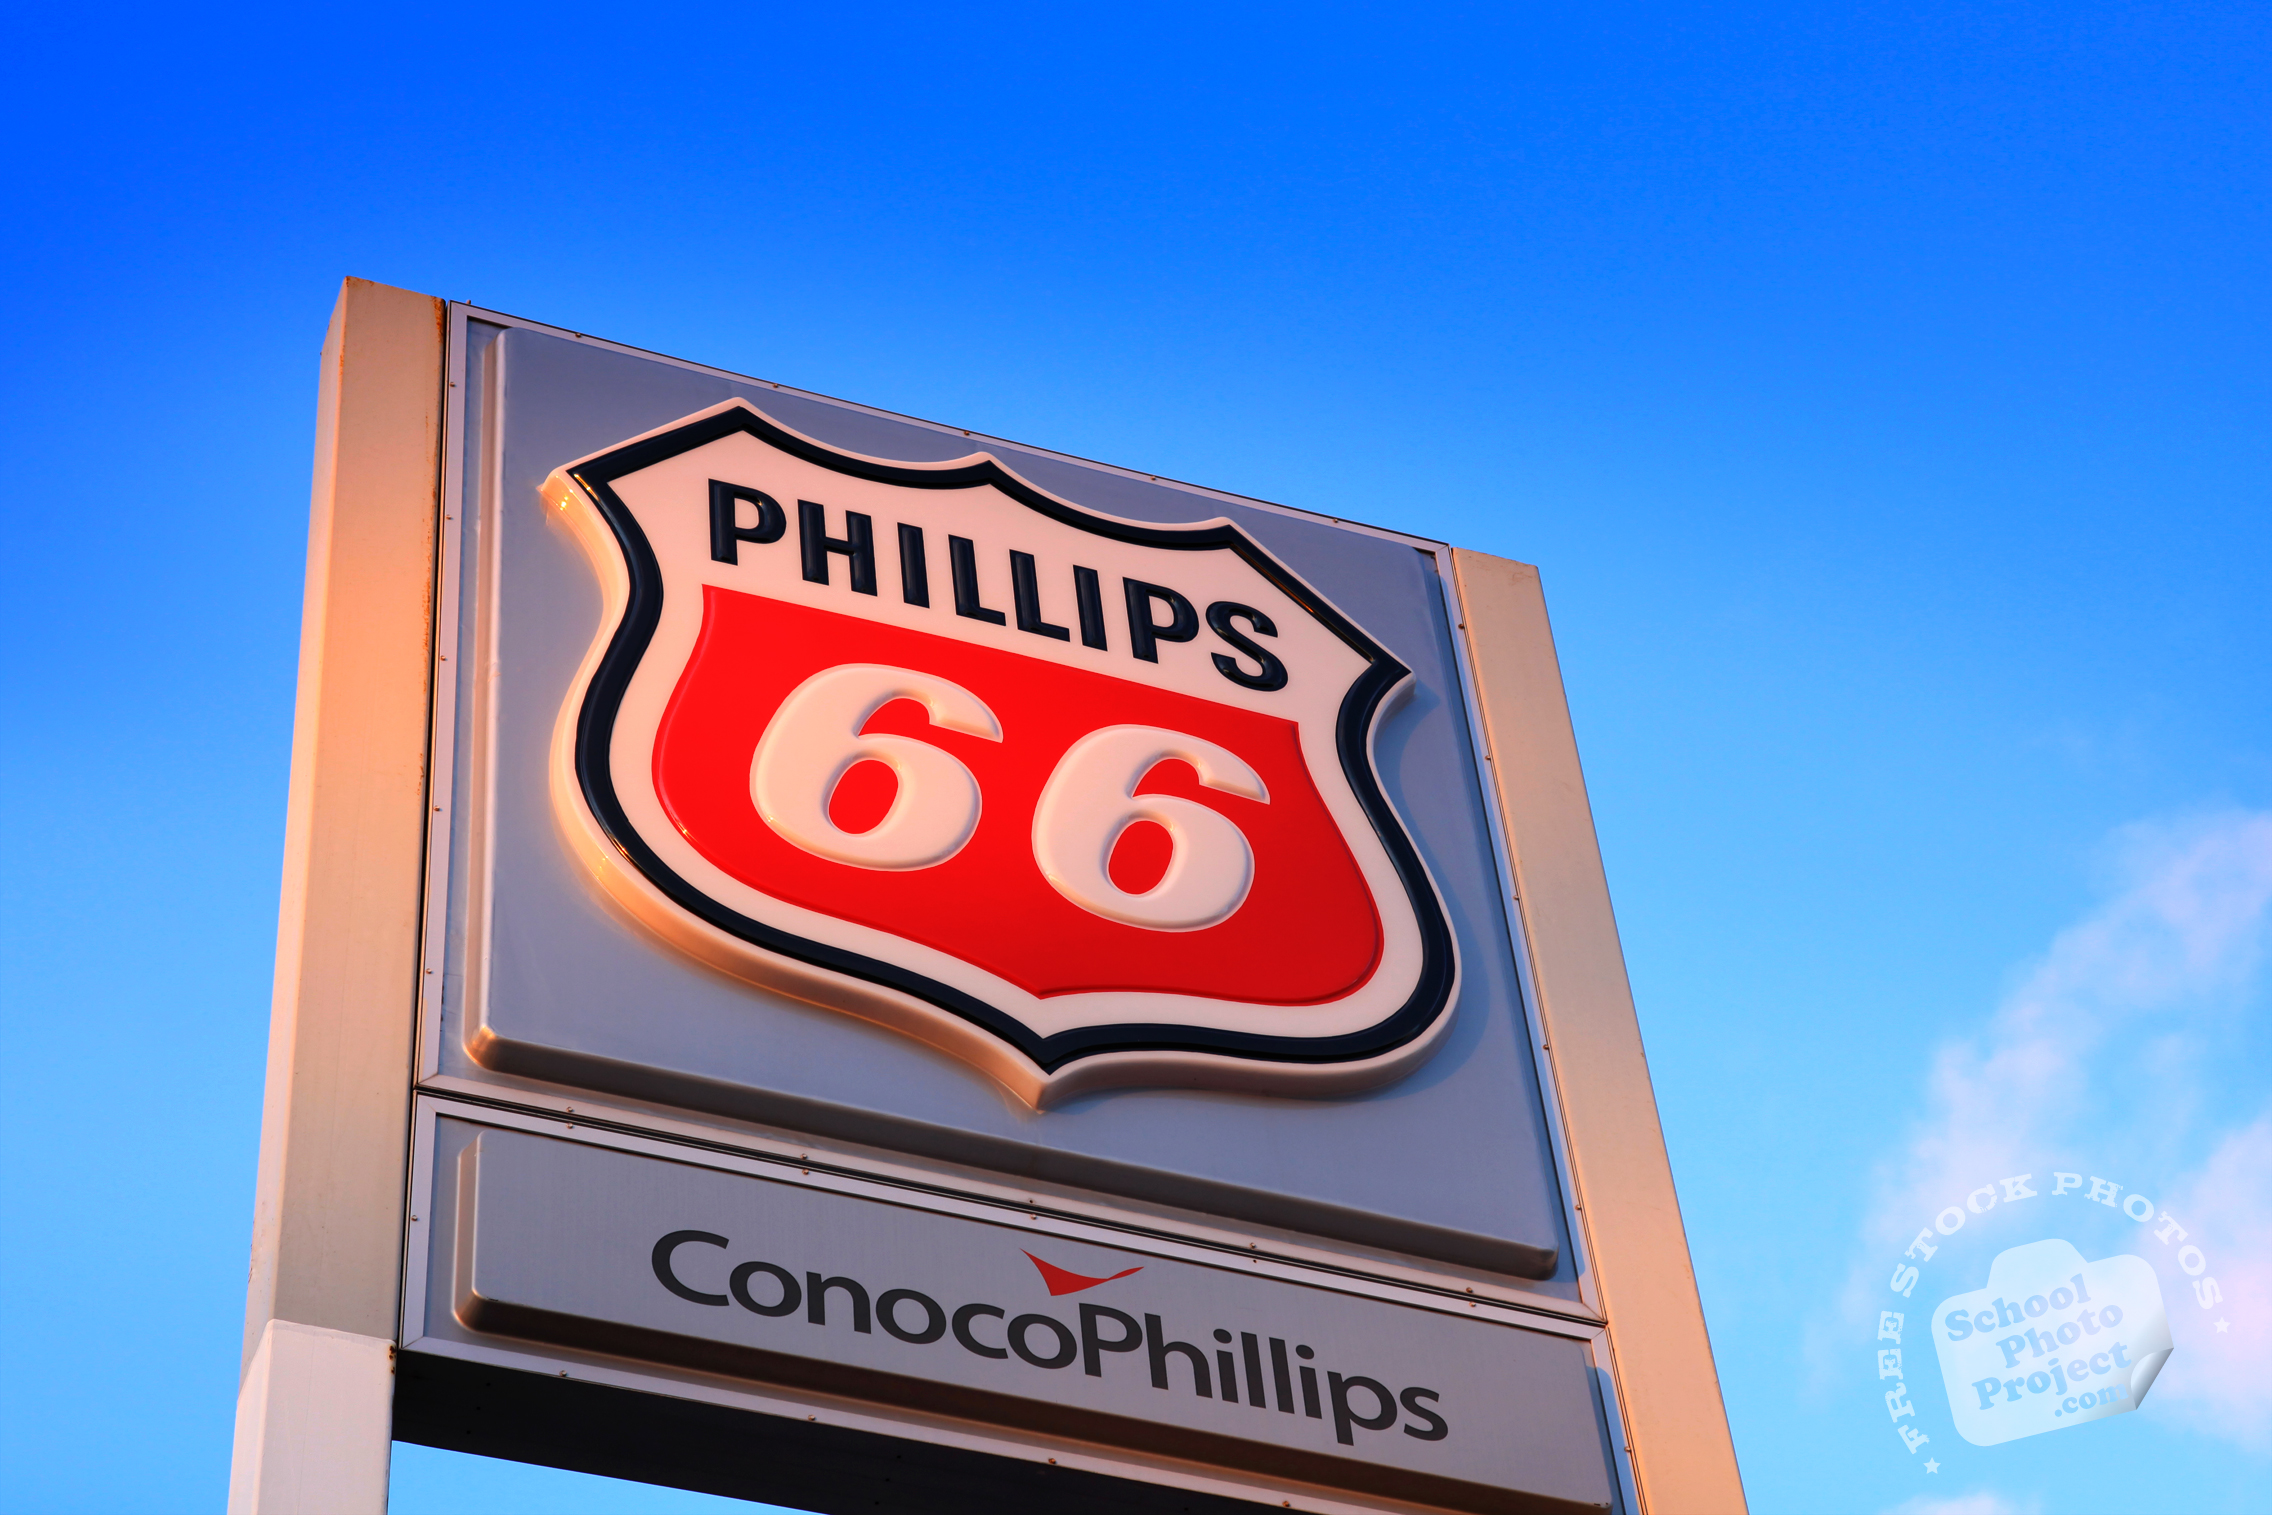 FREE Phillips 66 Logo, Phillips 66 Gas Station Store Identity, Popular Company's Brand Images